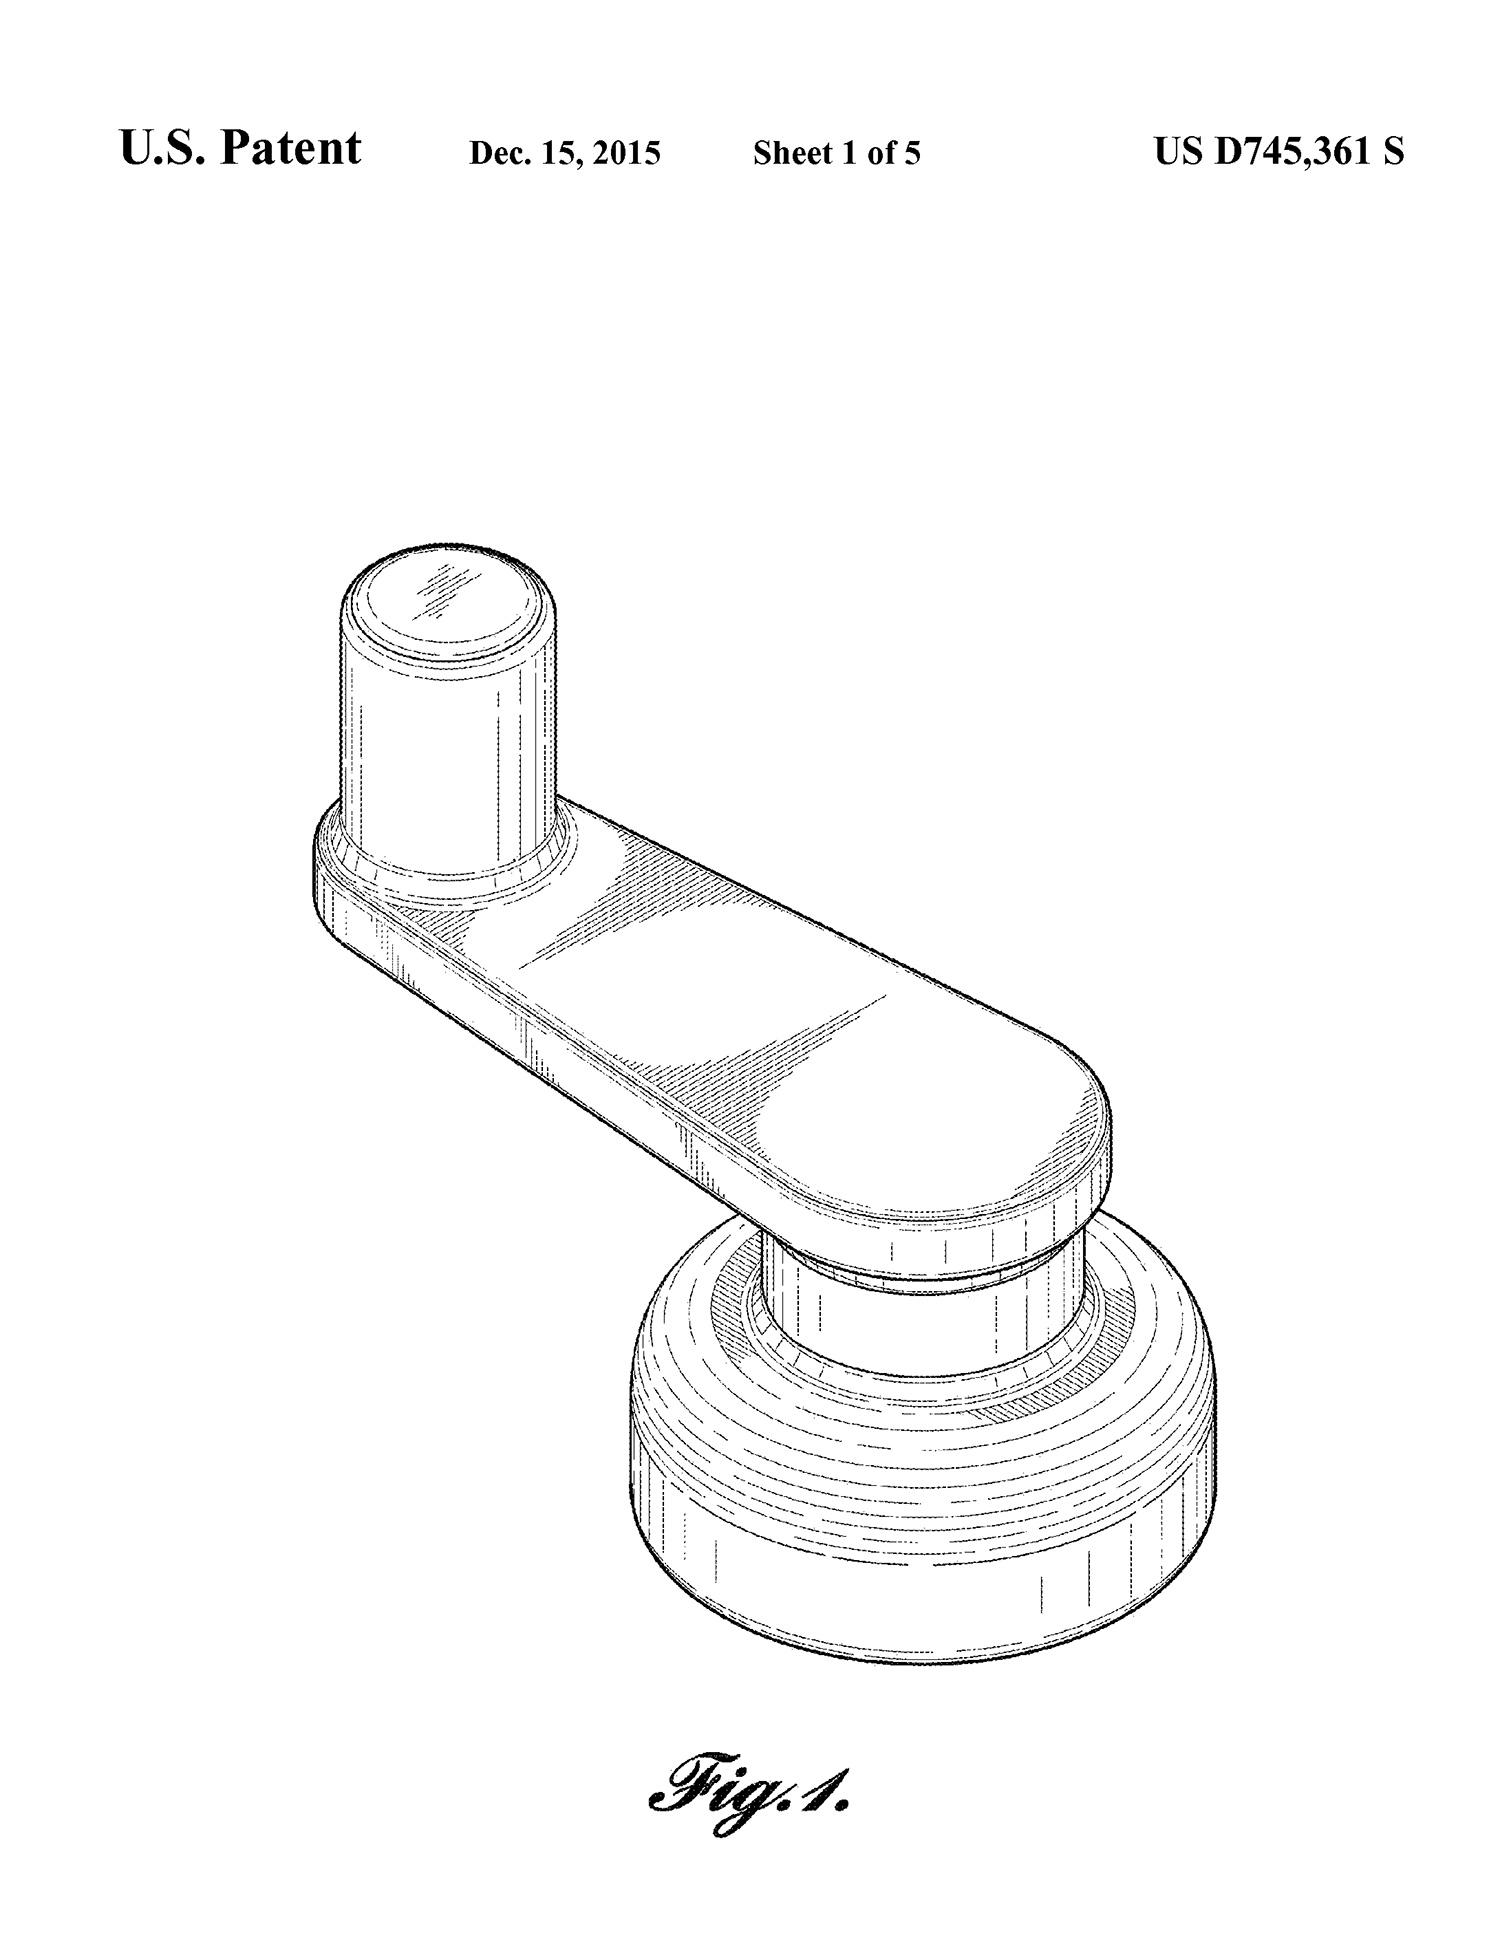 A drawing of a crank, viewed diagonally from the top. Patent information, including number and date, is at the top of the image.